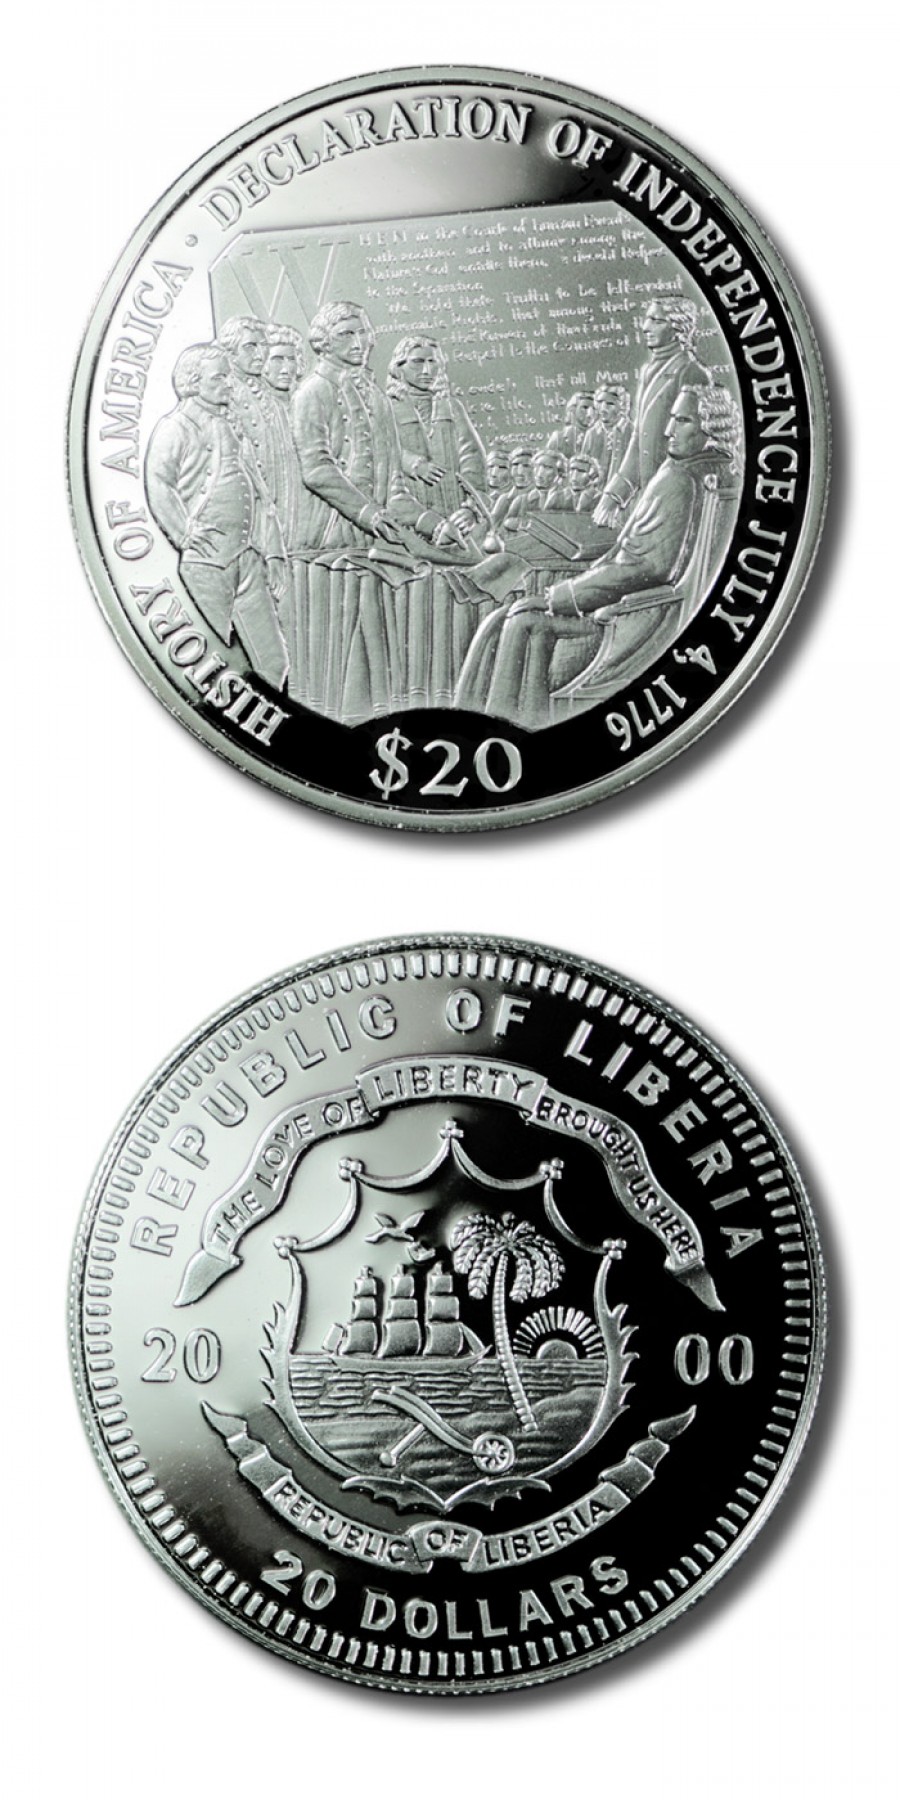 Declaration Of Independence Coin Republic Of Liberia